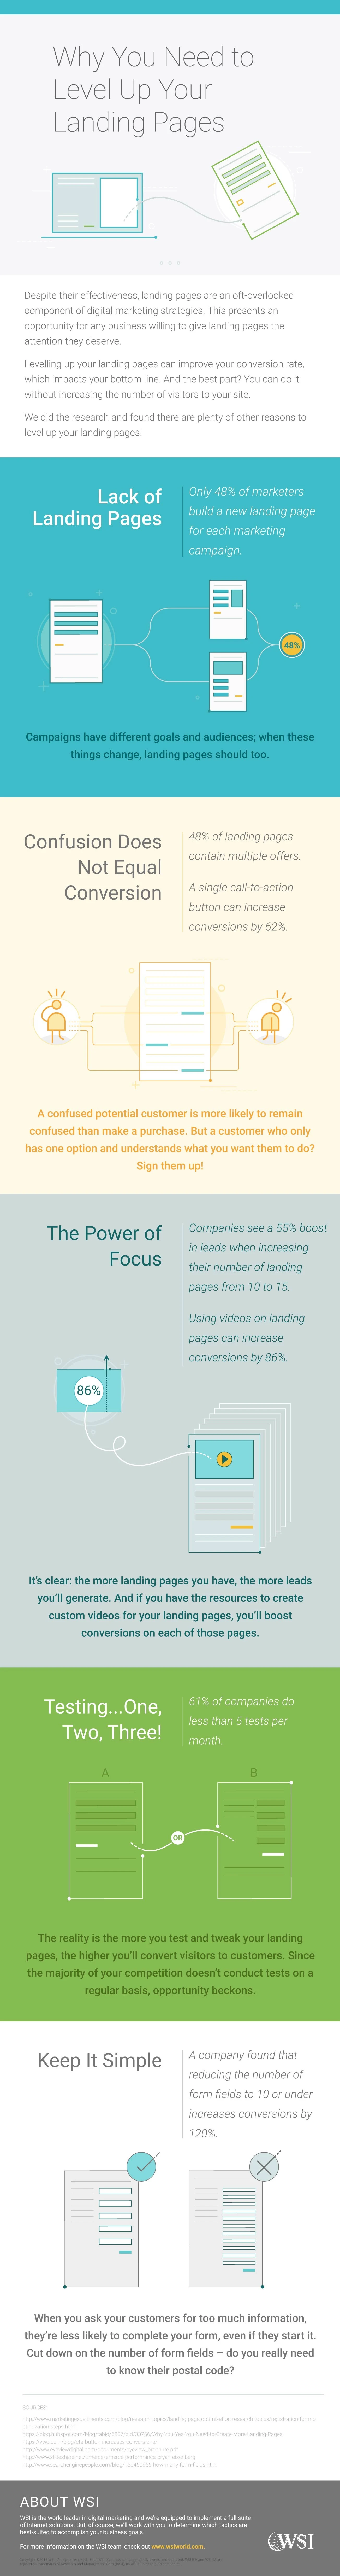 Why You Need to Level up Your Landing Pages - #infographic